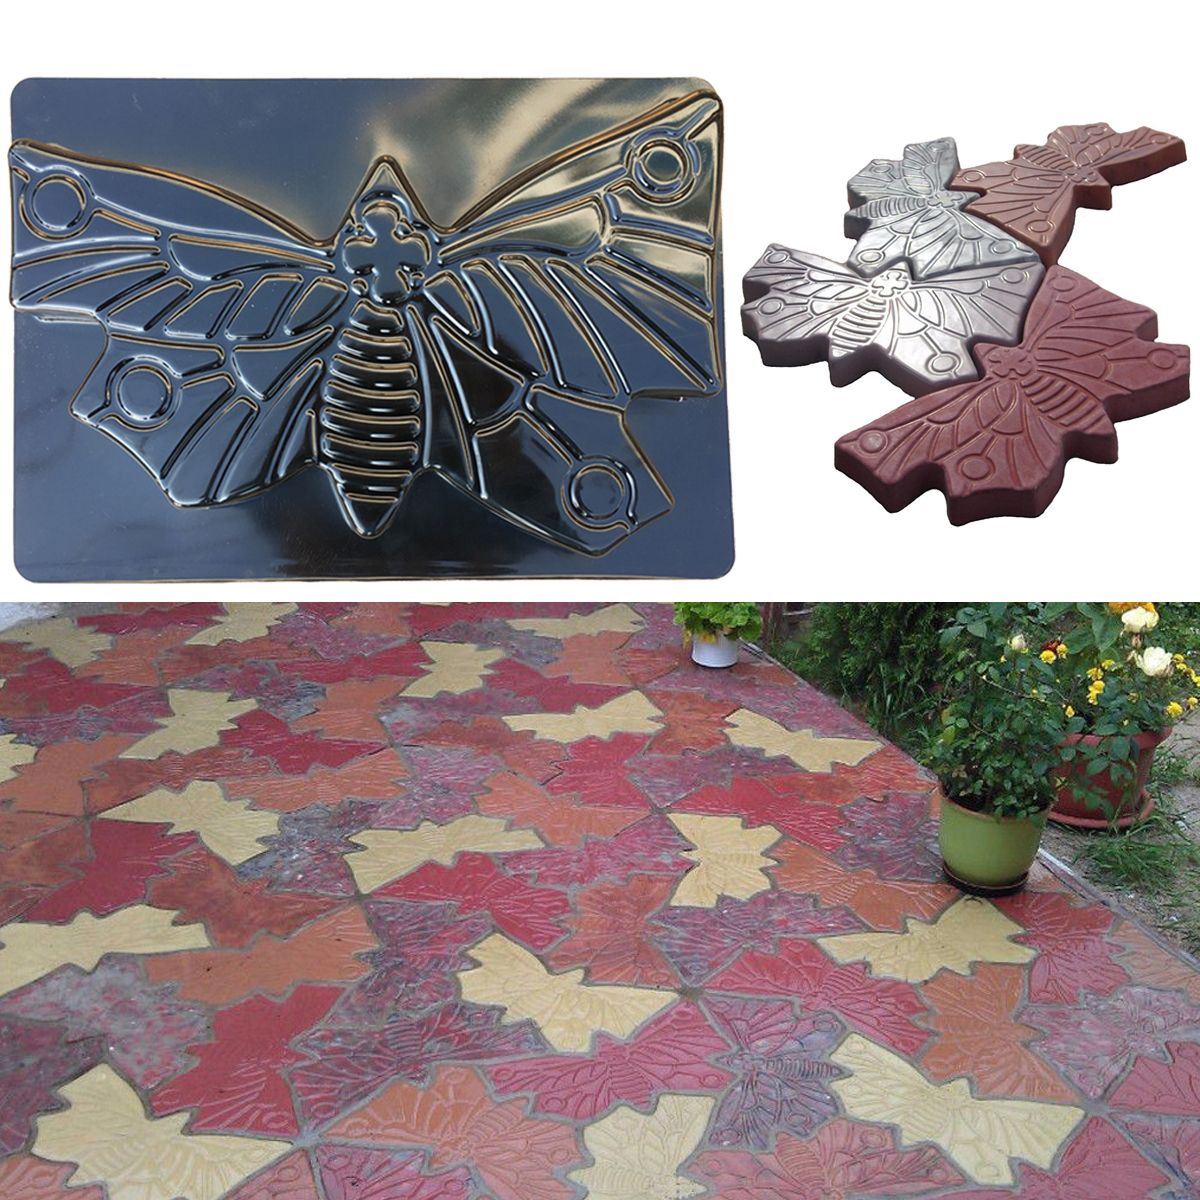 Butterfly-Stepping-Stone-Mold-Concrete-Cement-Brick-Mould-For-Park-Garden-Path-1532562